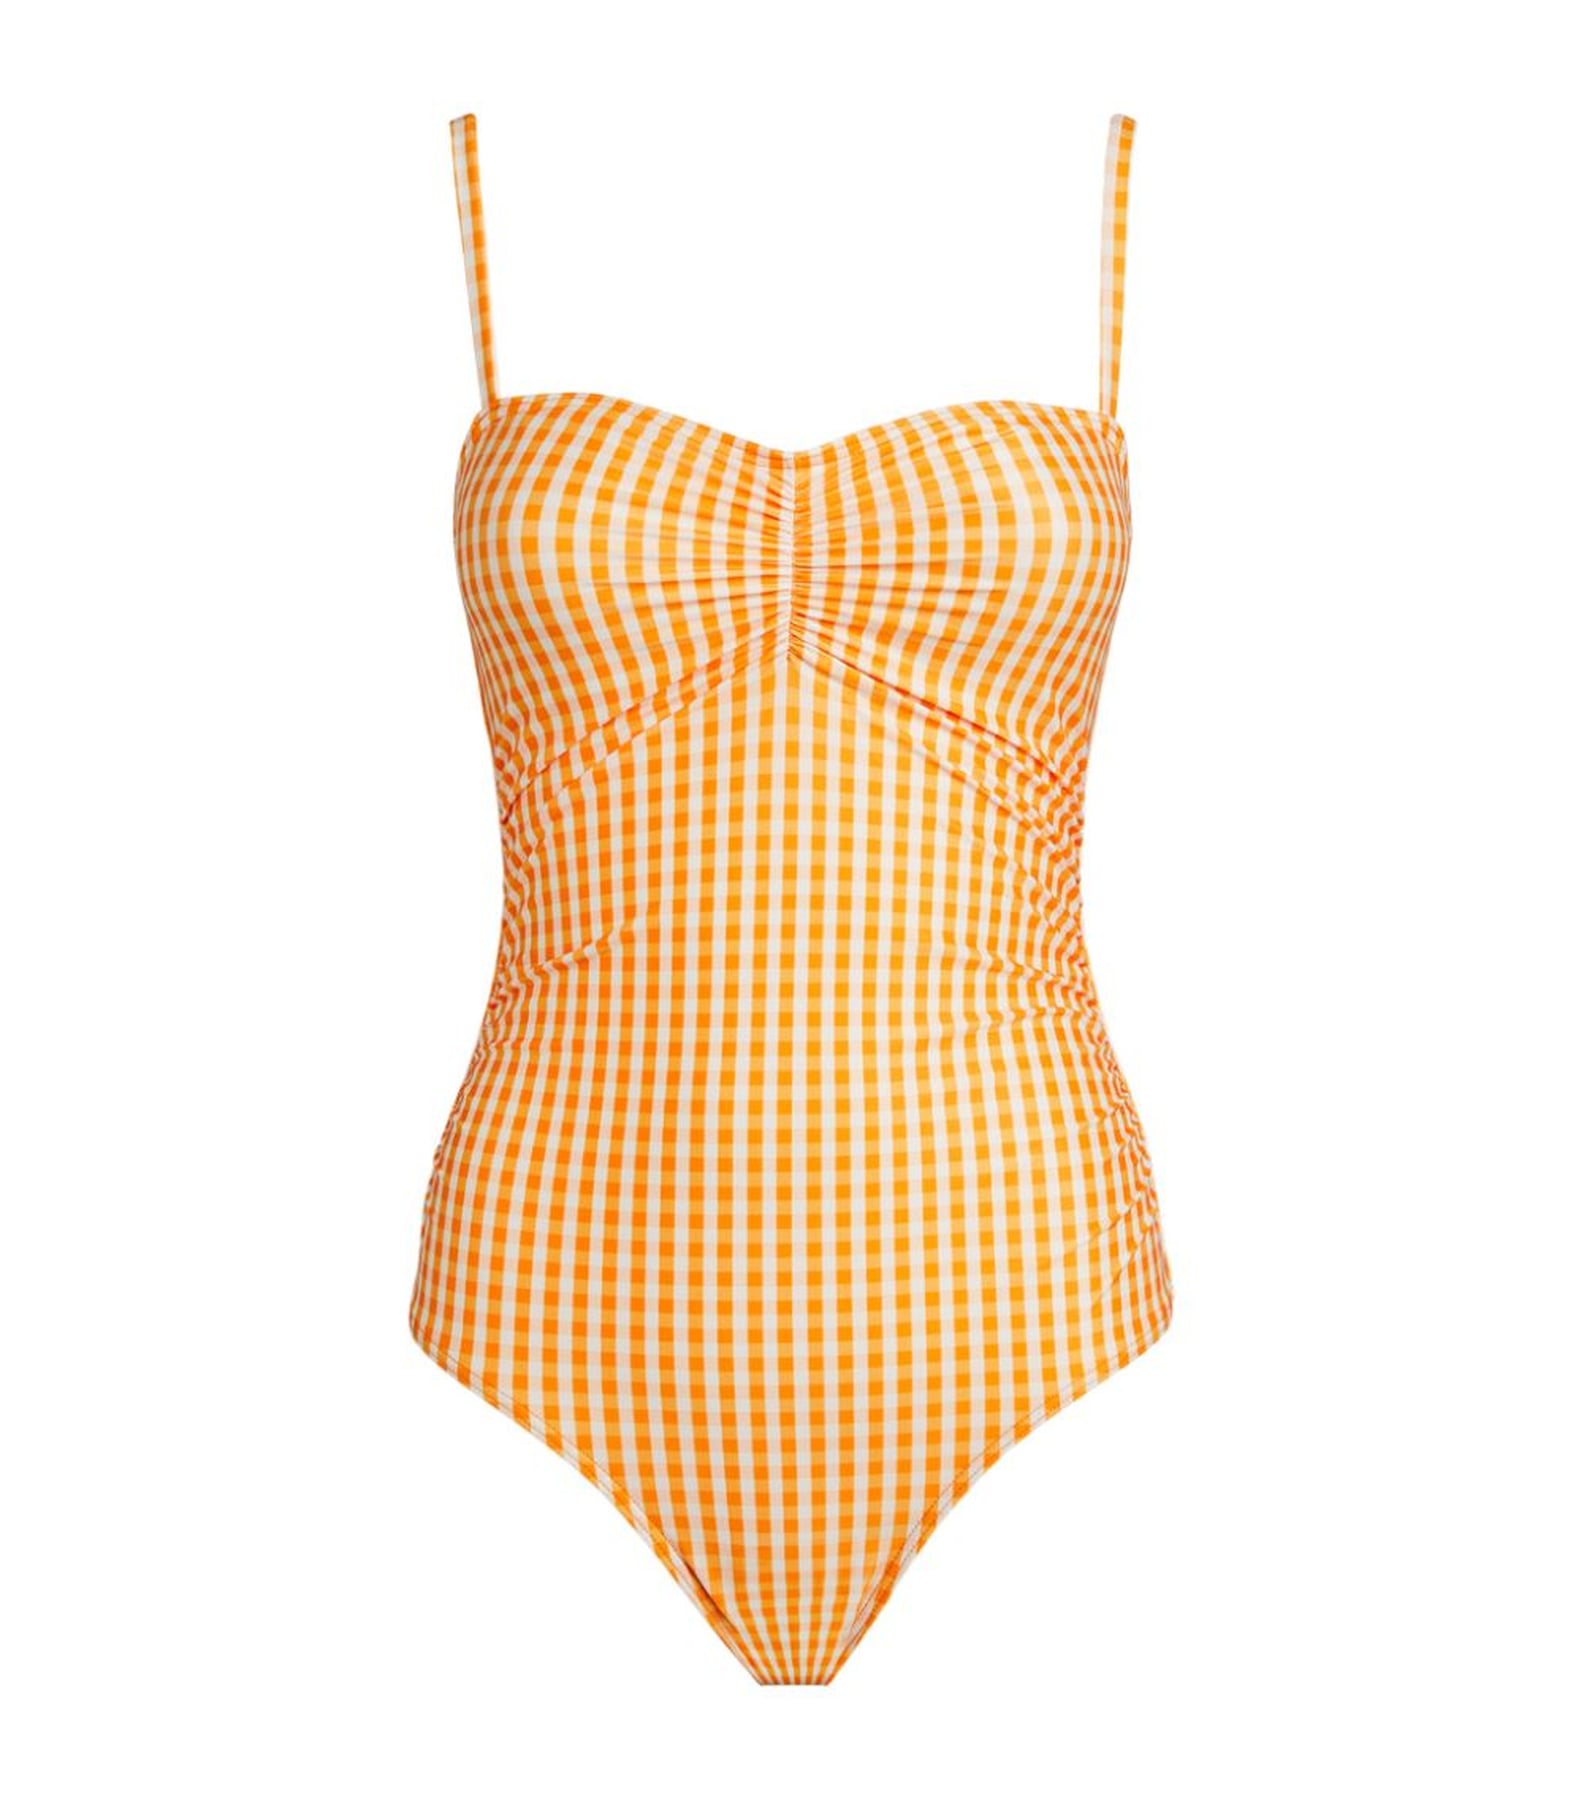 8 Different Swimsuit Styles That Every Woman Should Own | POPSUGAR Fashion